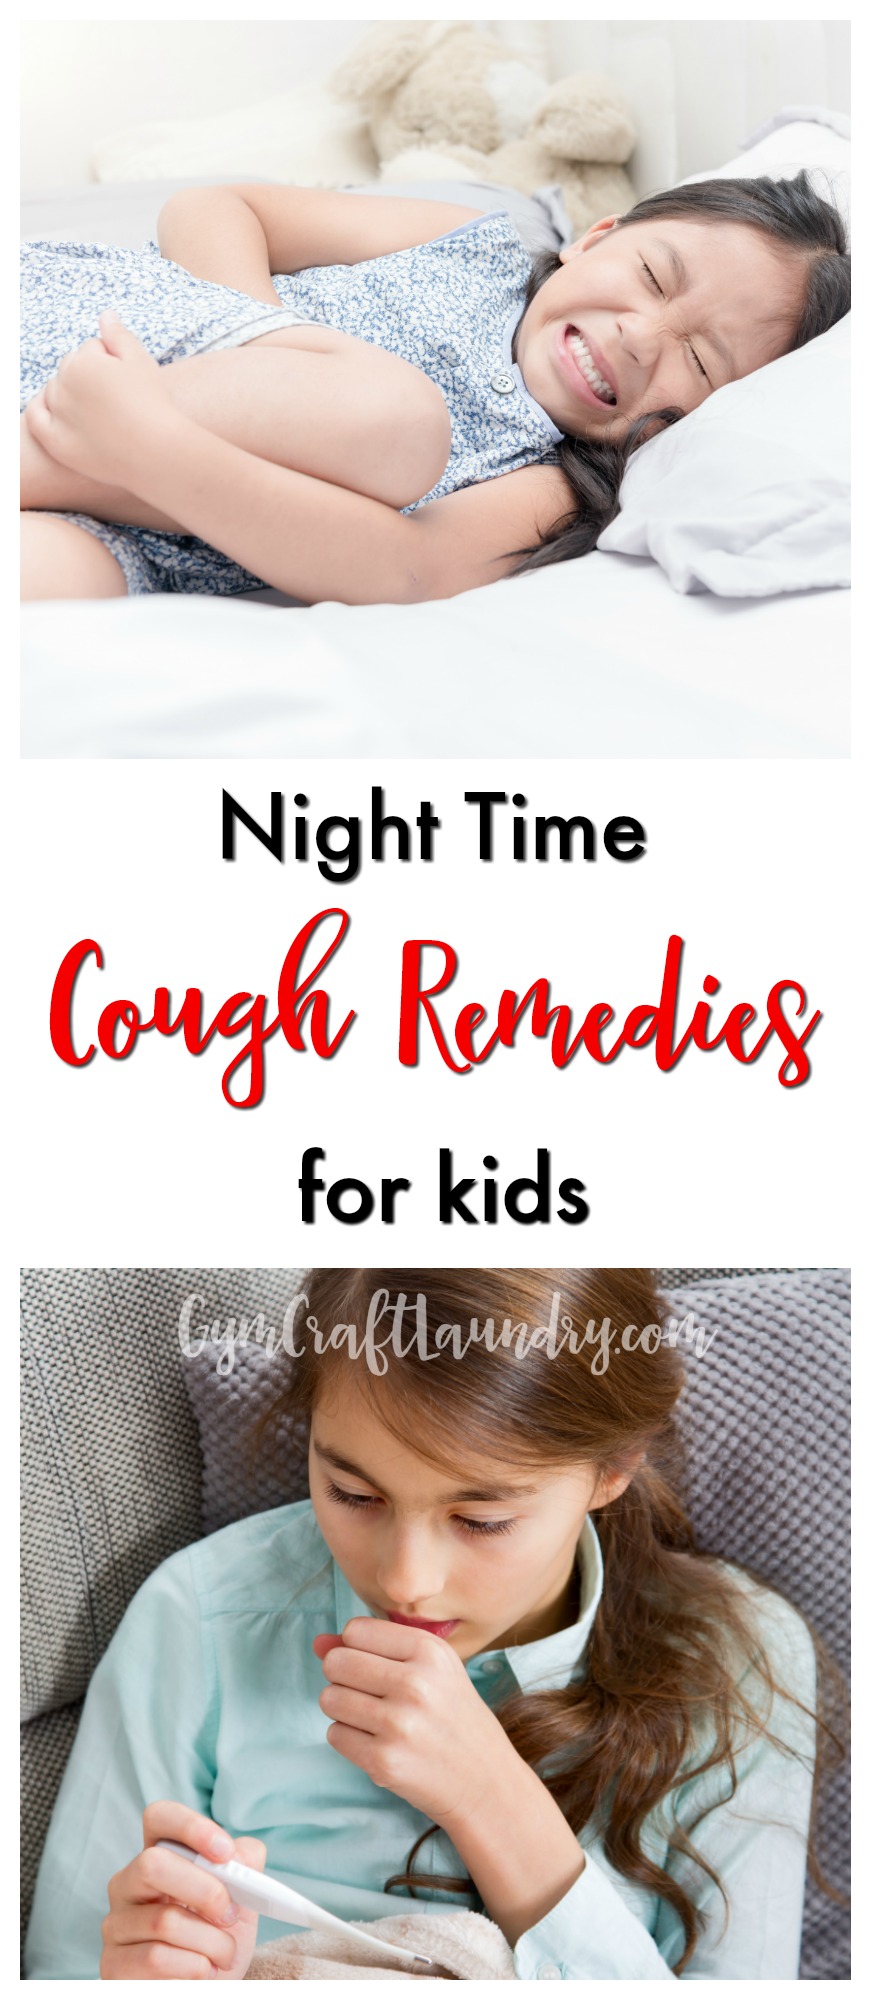 Night time Cough Remedies for kids